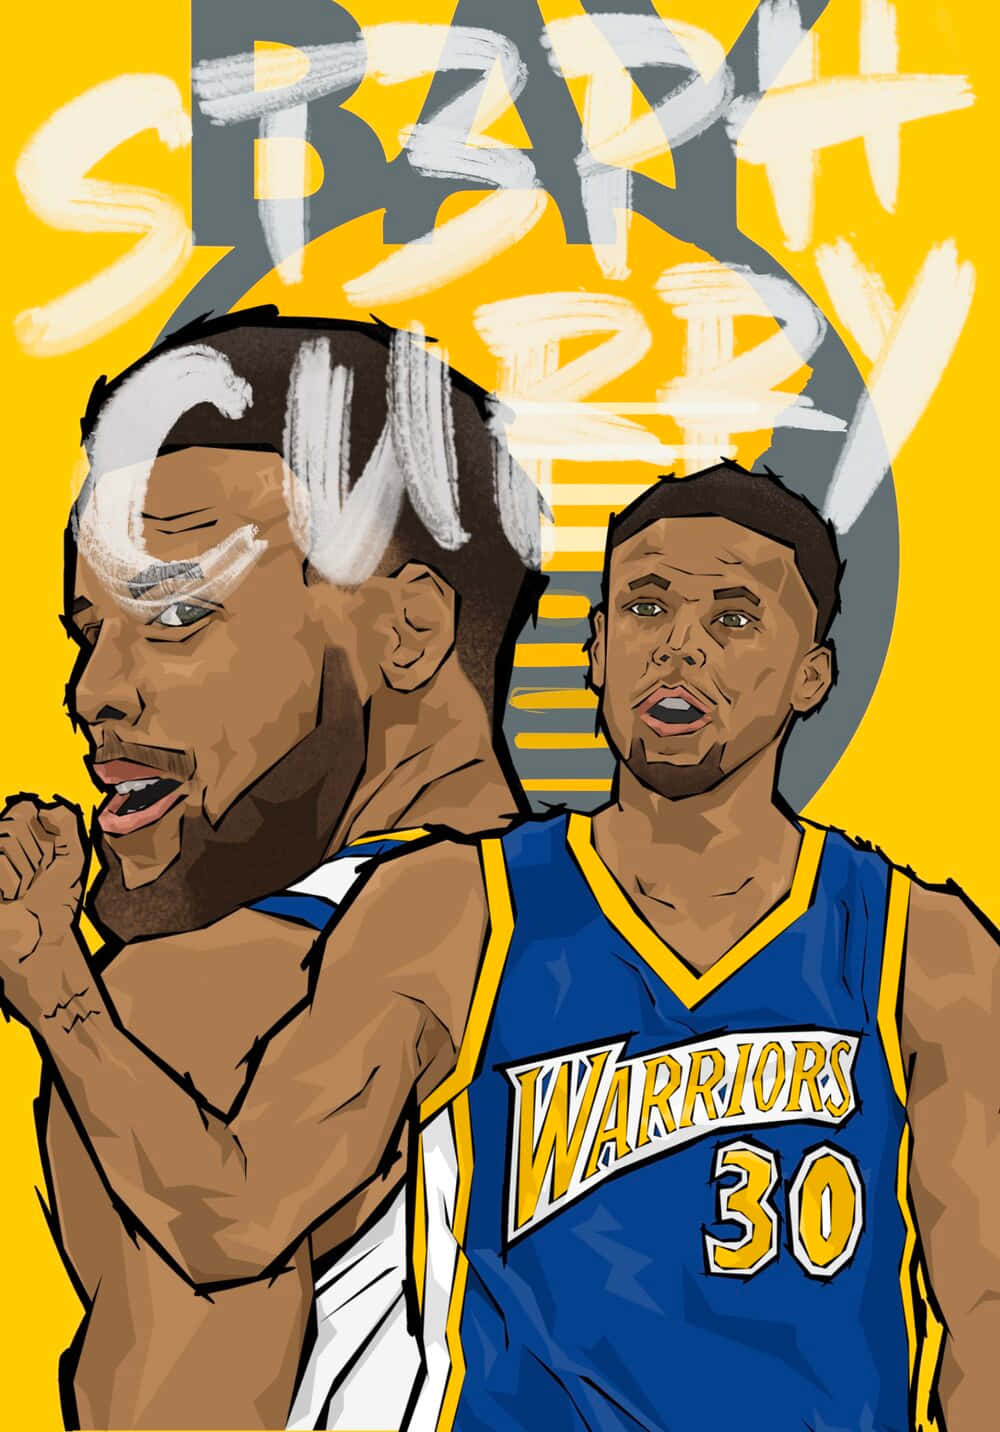 Stephen Curry Cartoon Vector Back Caricature Stock Vector (Royalty Free)  2238183667